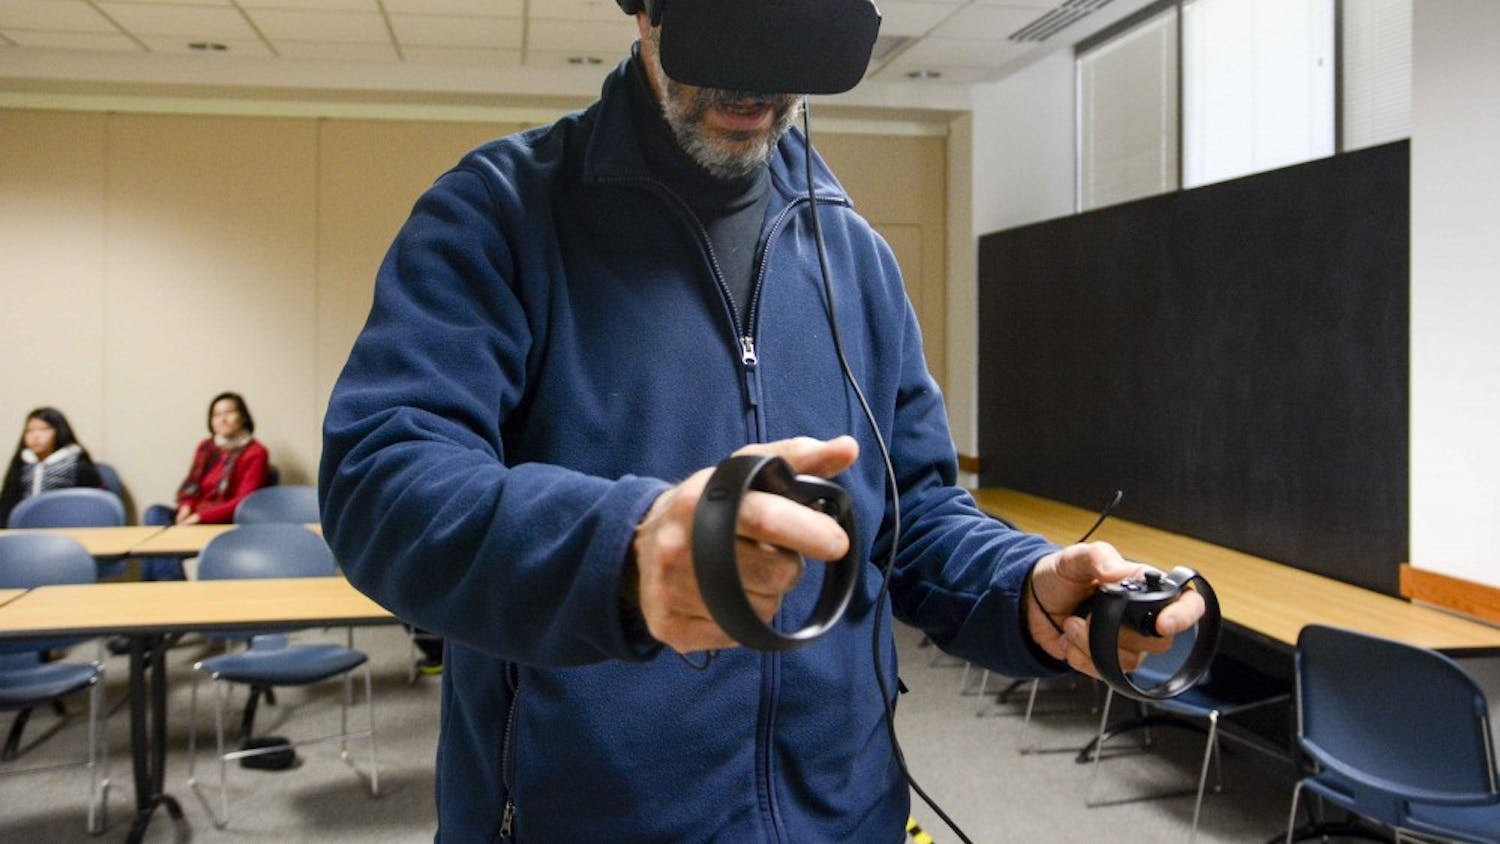 Lweis Rifkowitz, an artist, draws in a three dimensional room with virtual reality headsets named Rift Oculus on Sunday at Monroe Country Public Library. "I love It!" Rifkowitz said.